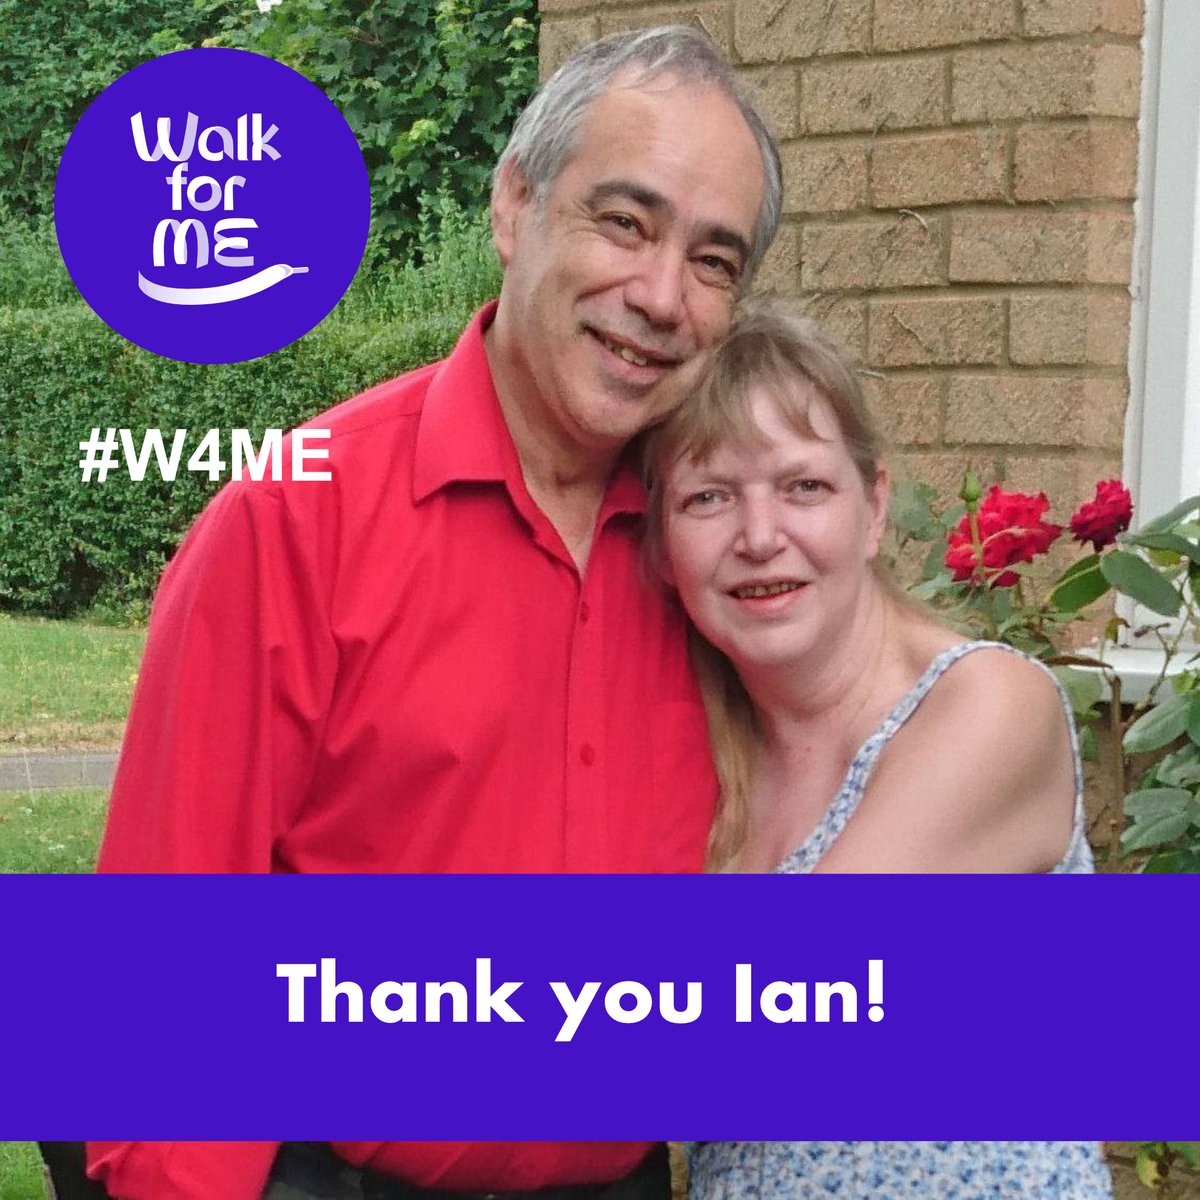 Welcome back to Walk for ME #W4ME to the amazing Ian Thomson. This is the 4th walk Ian is doing in memory of his late fiancée Sarah Turner who had ME. Ian is walking the number 183 bus route raising funds for @Invest_in_ME justgiving.com/page/ian-thoms… Please donate if you can 💙